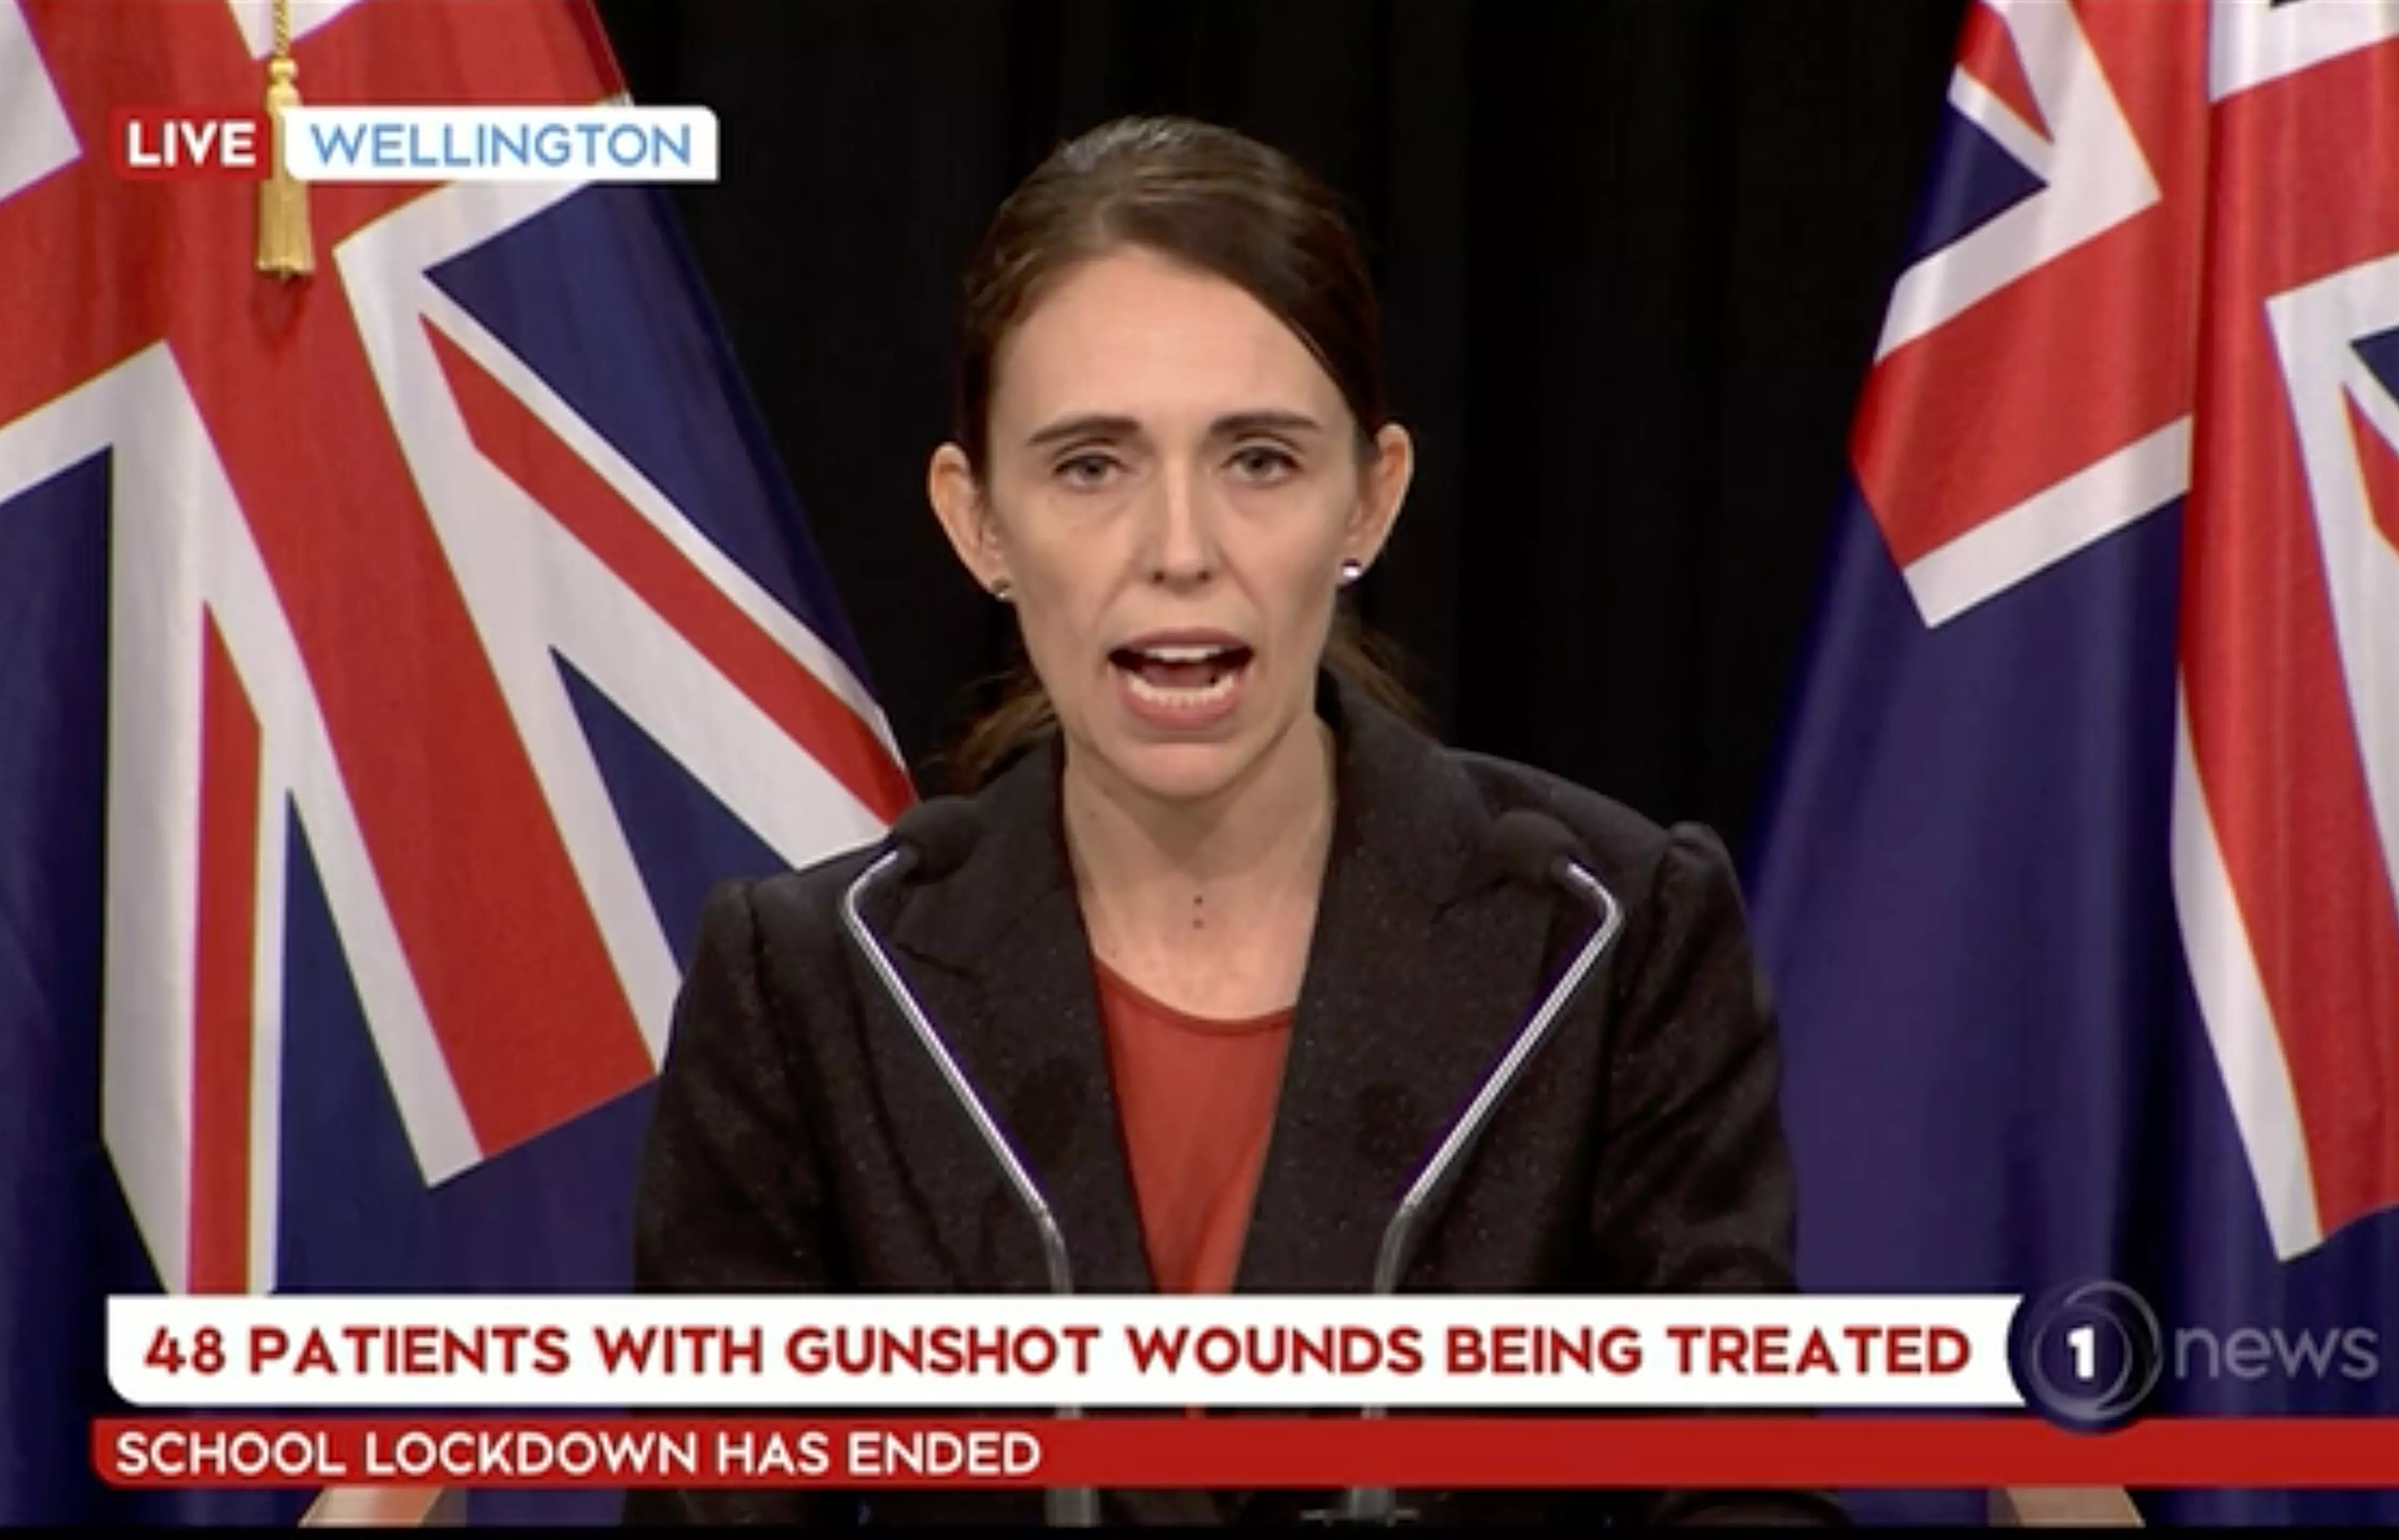 Prime Minister Jacinda Ardern gives a press conference from Wellington.